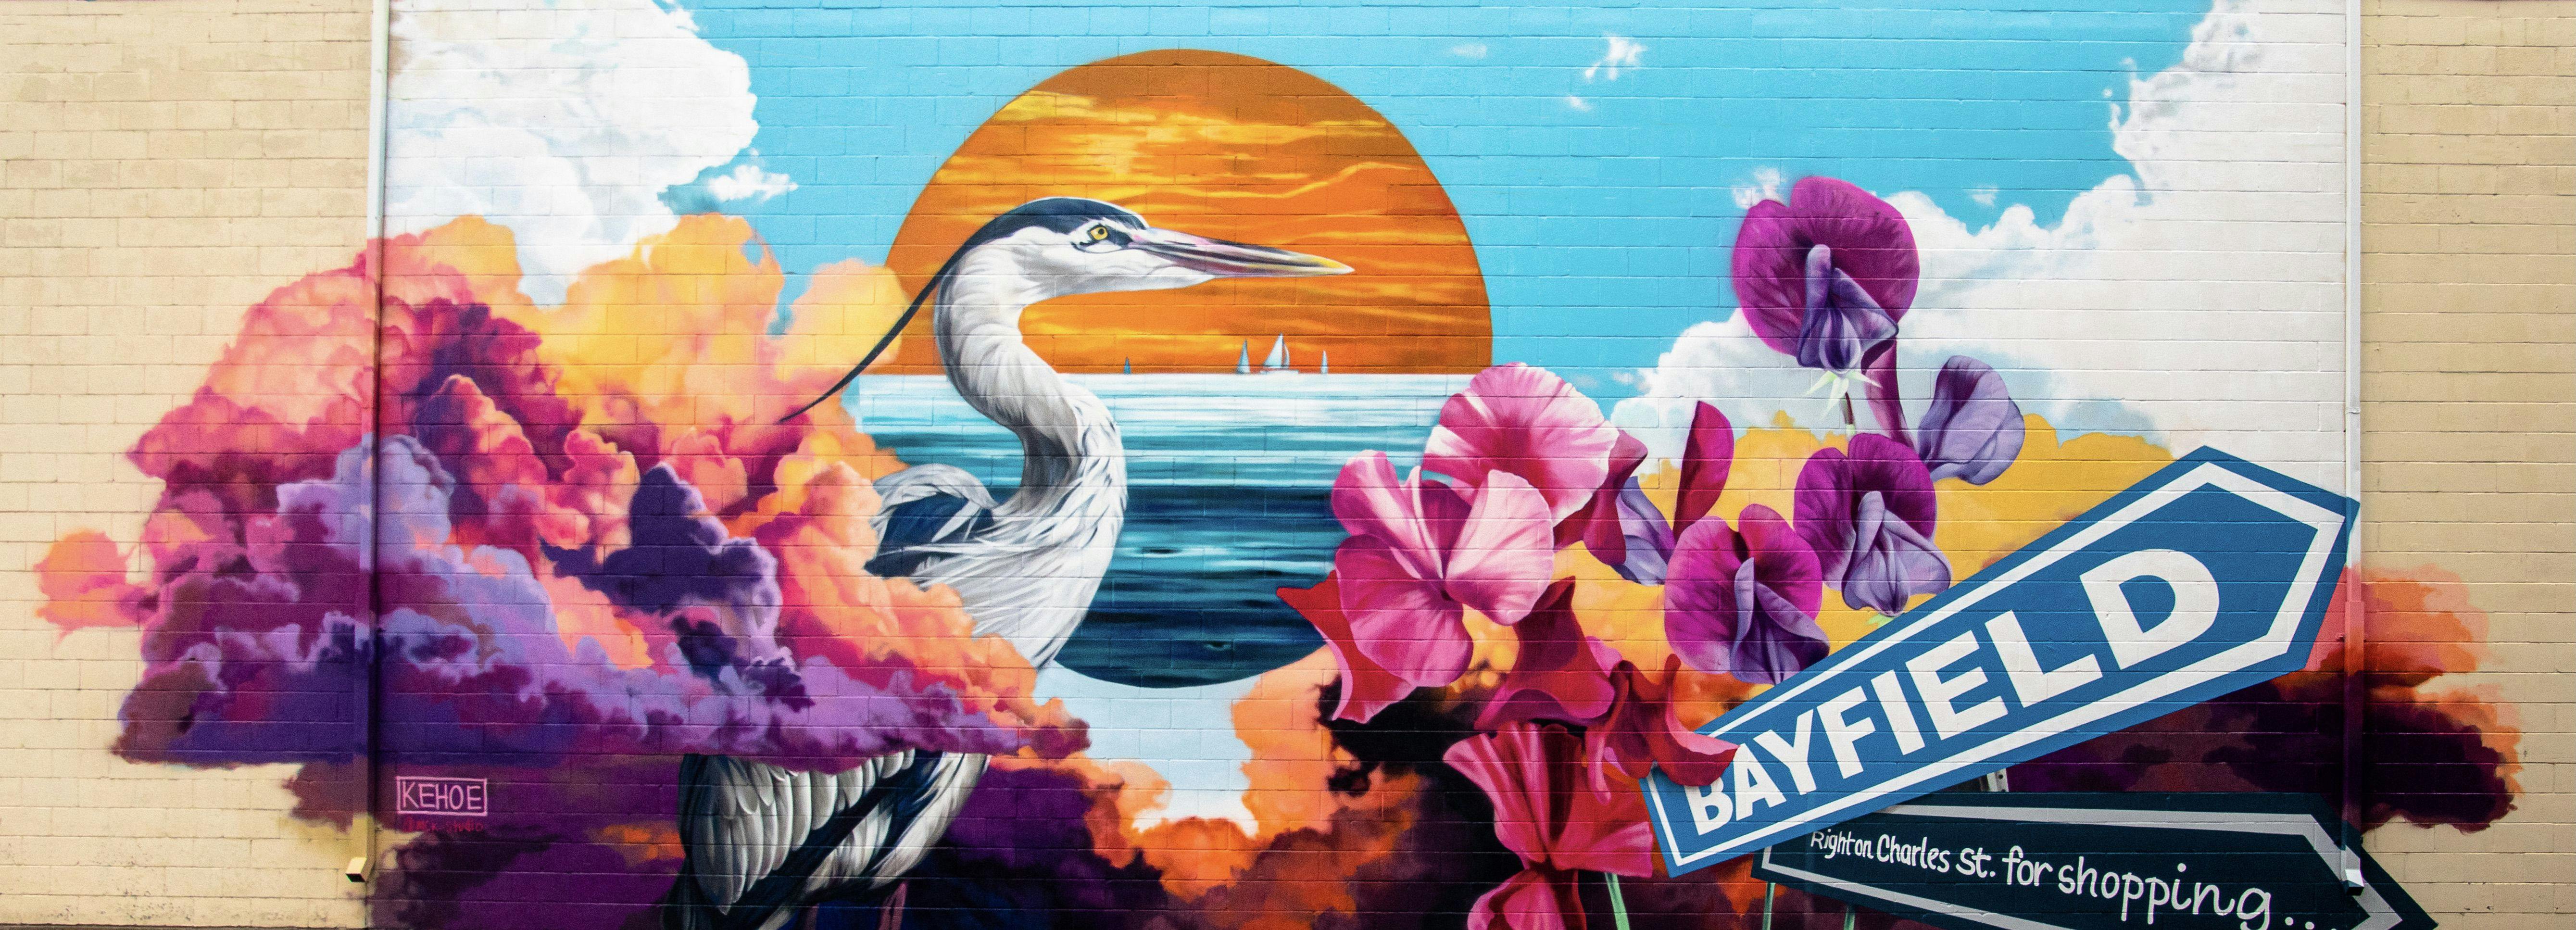 Bayfield Mural Submitted.jpg